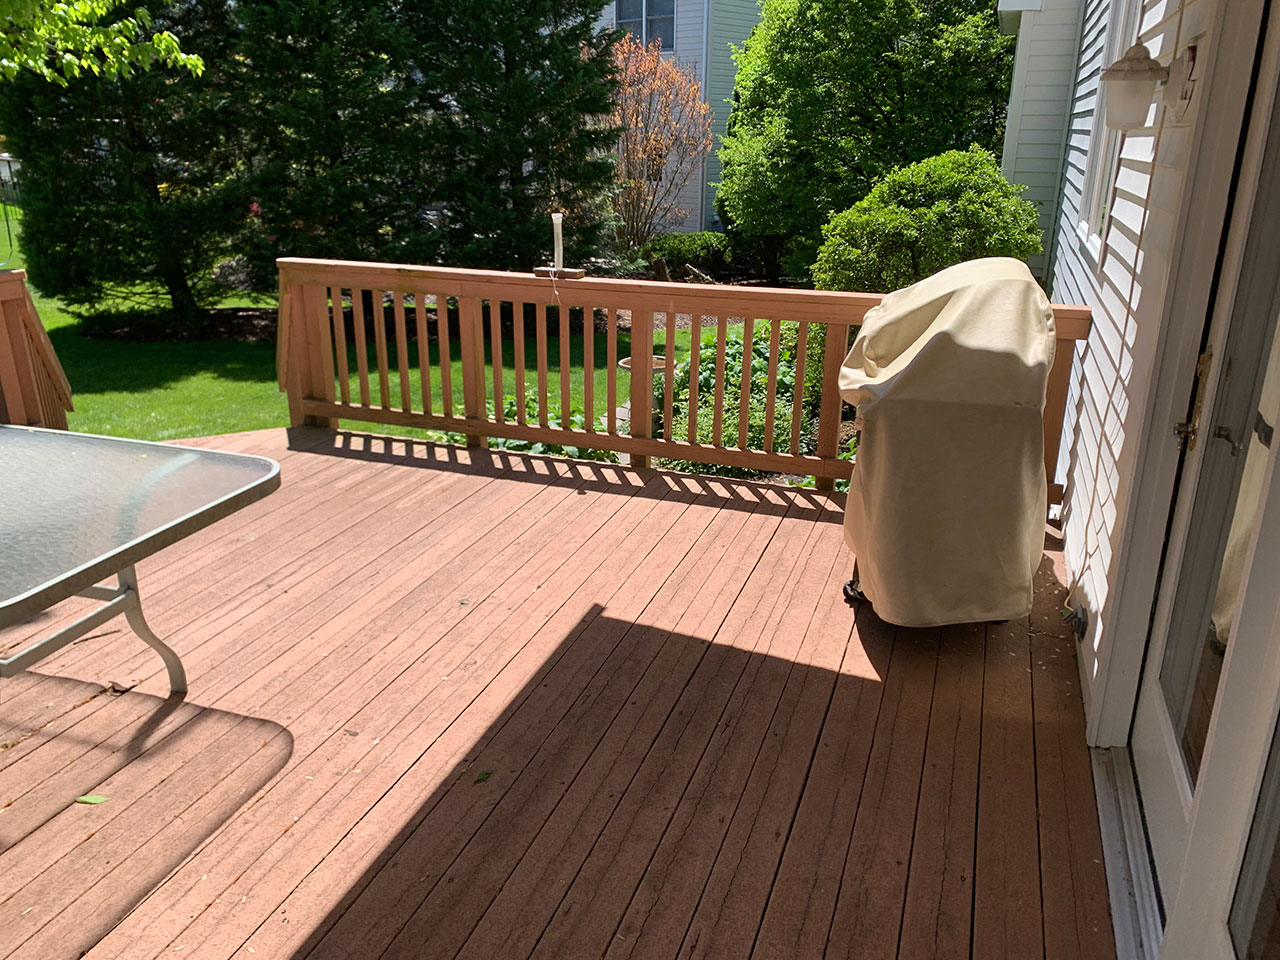 Morrestown Azek Deck Harvest collection with RDI Bronze Railing - Before